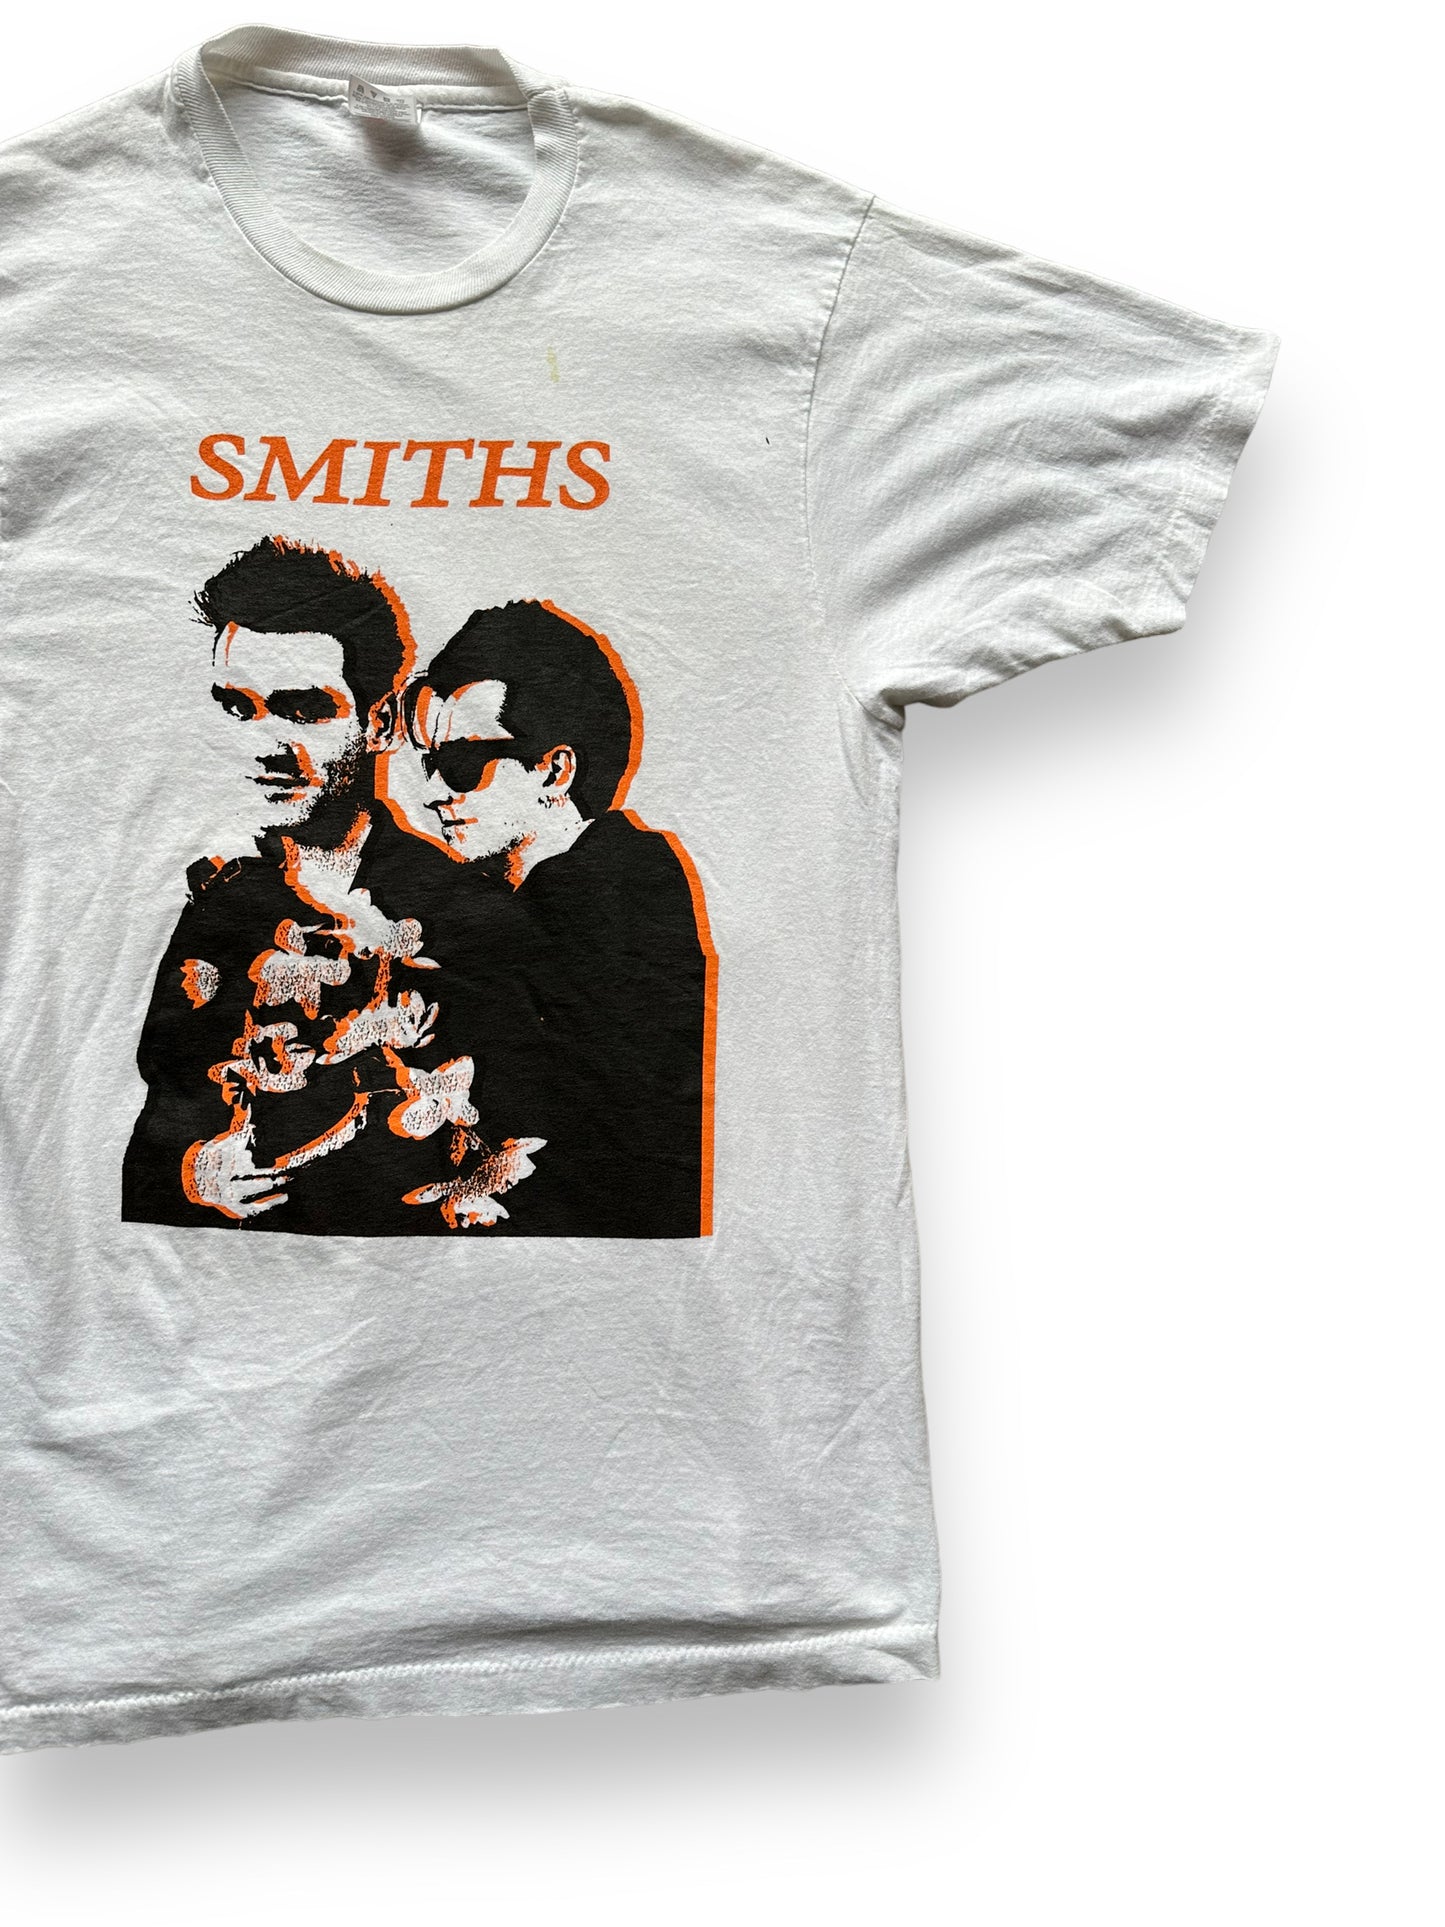 Front Left View of Vintage Smiths Bootleg Tee SZ L |  Barn Owl Vintage Clothing | Vintage Rock Tees Seattle